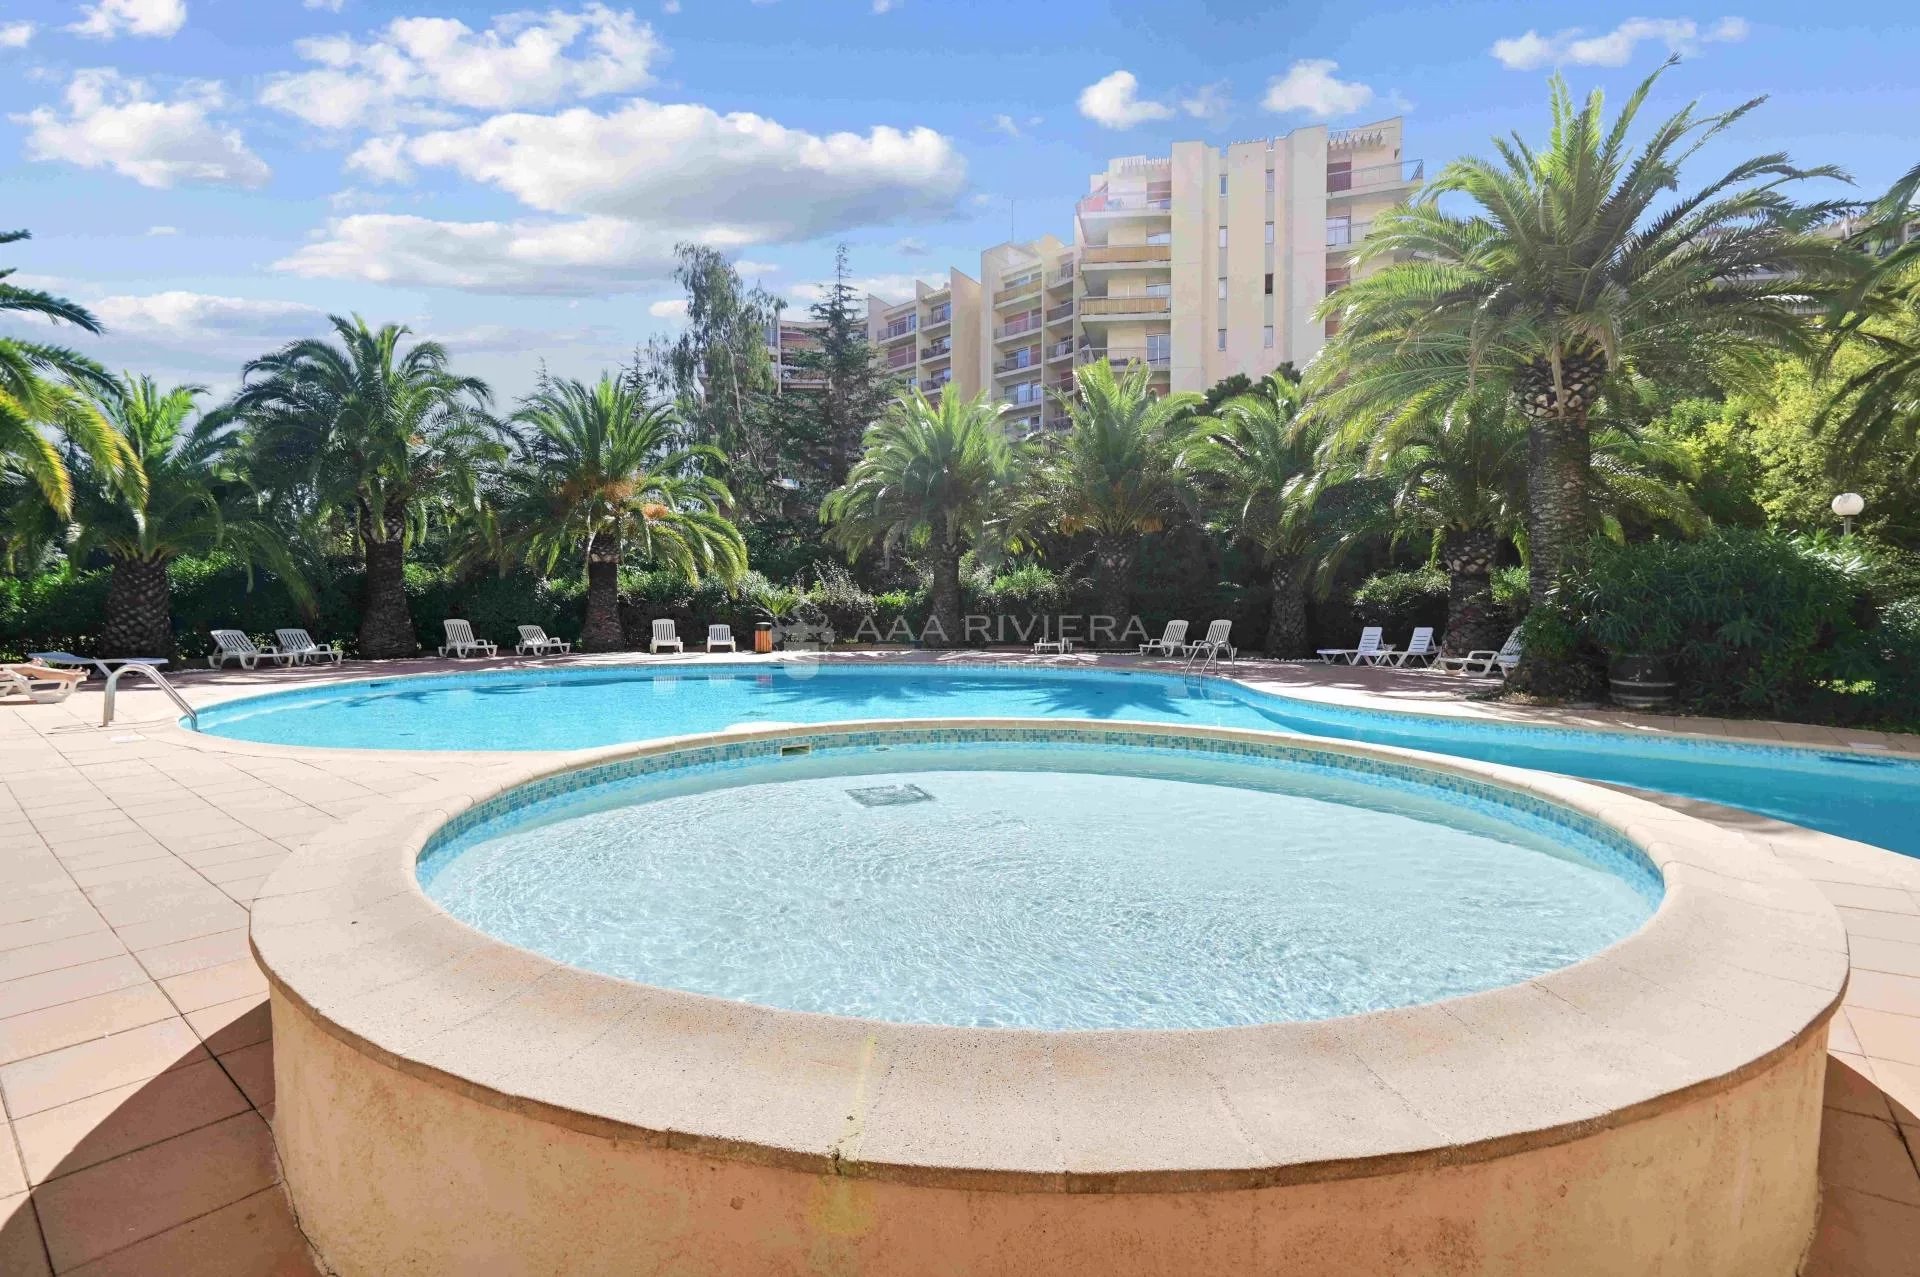 SOLD - SOLE AGENT - Mandelieu Cannes Marina -  Nice 2 bedroom apartment with big terrace and view in resdience with pool, tennis and cartaker